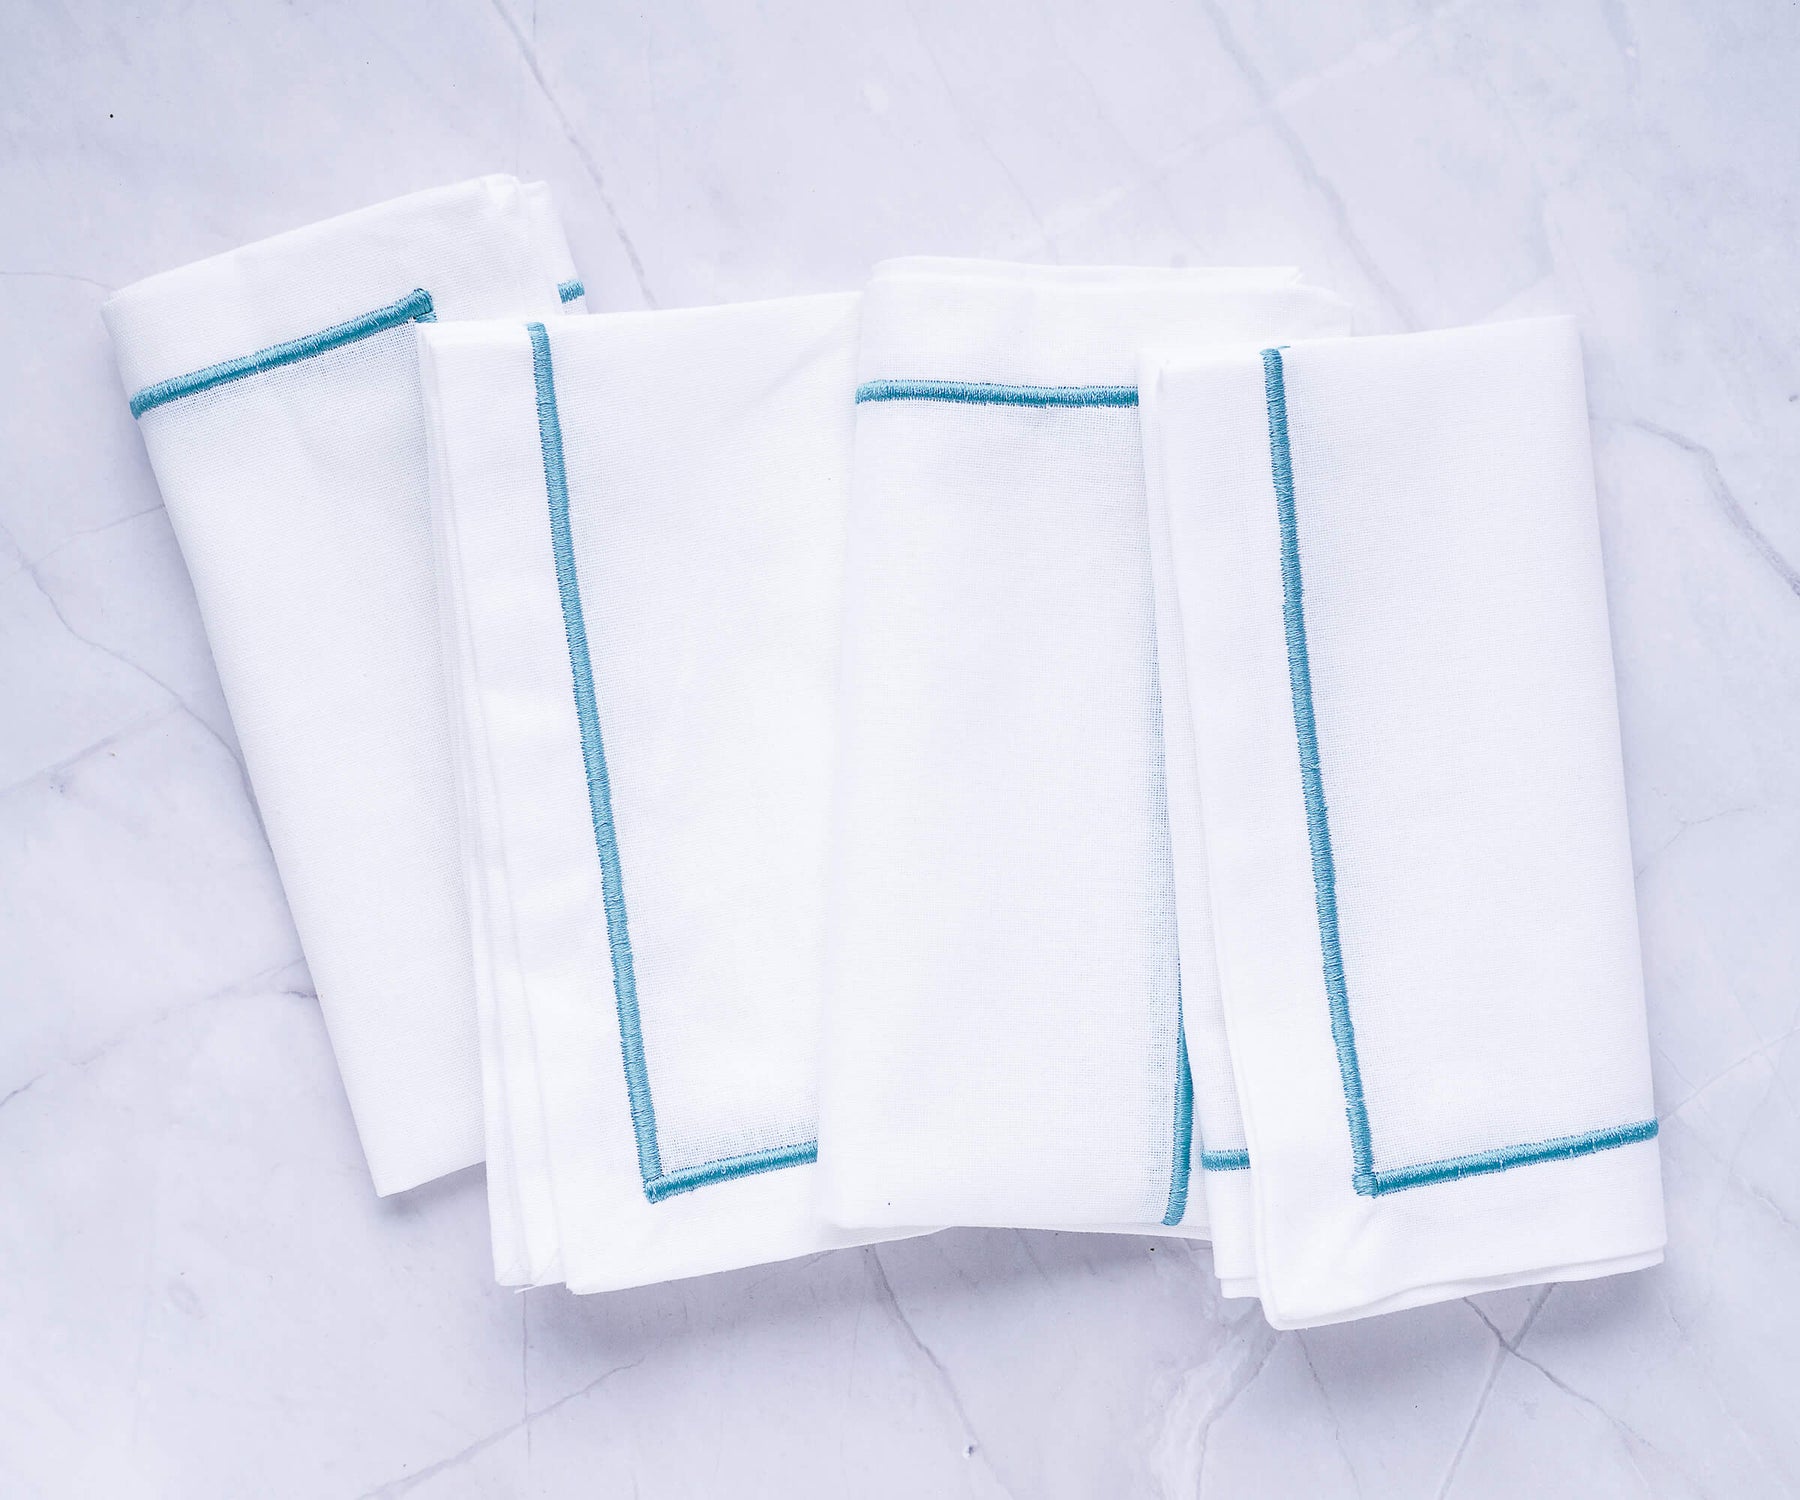 Four white dinner napkins with blue trim displayed together